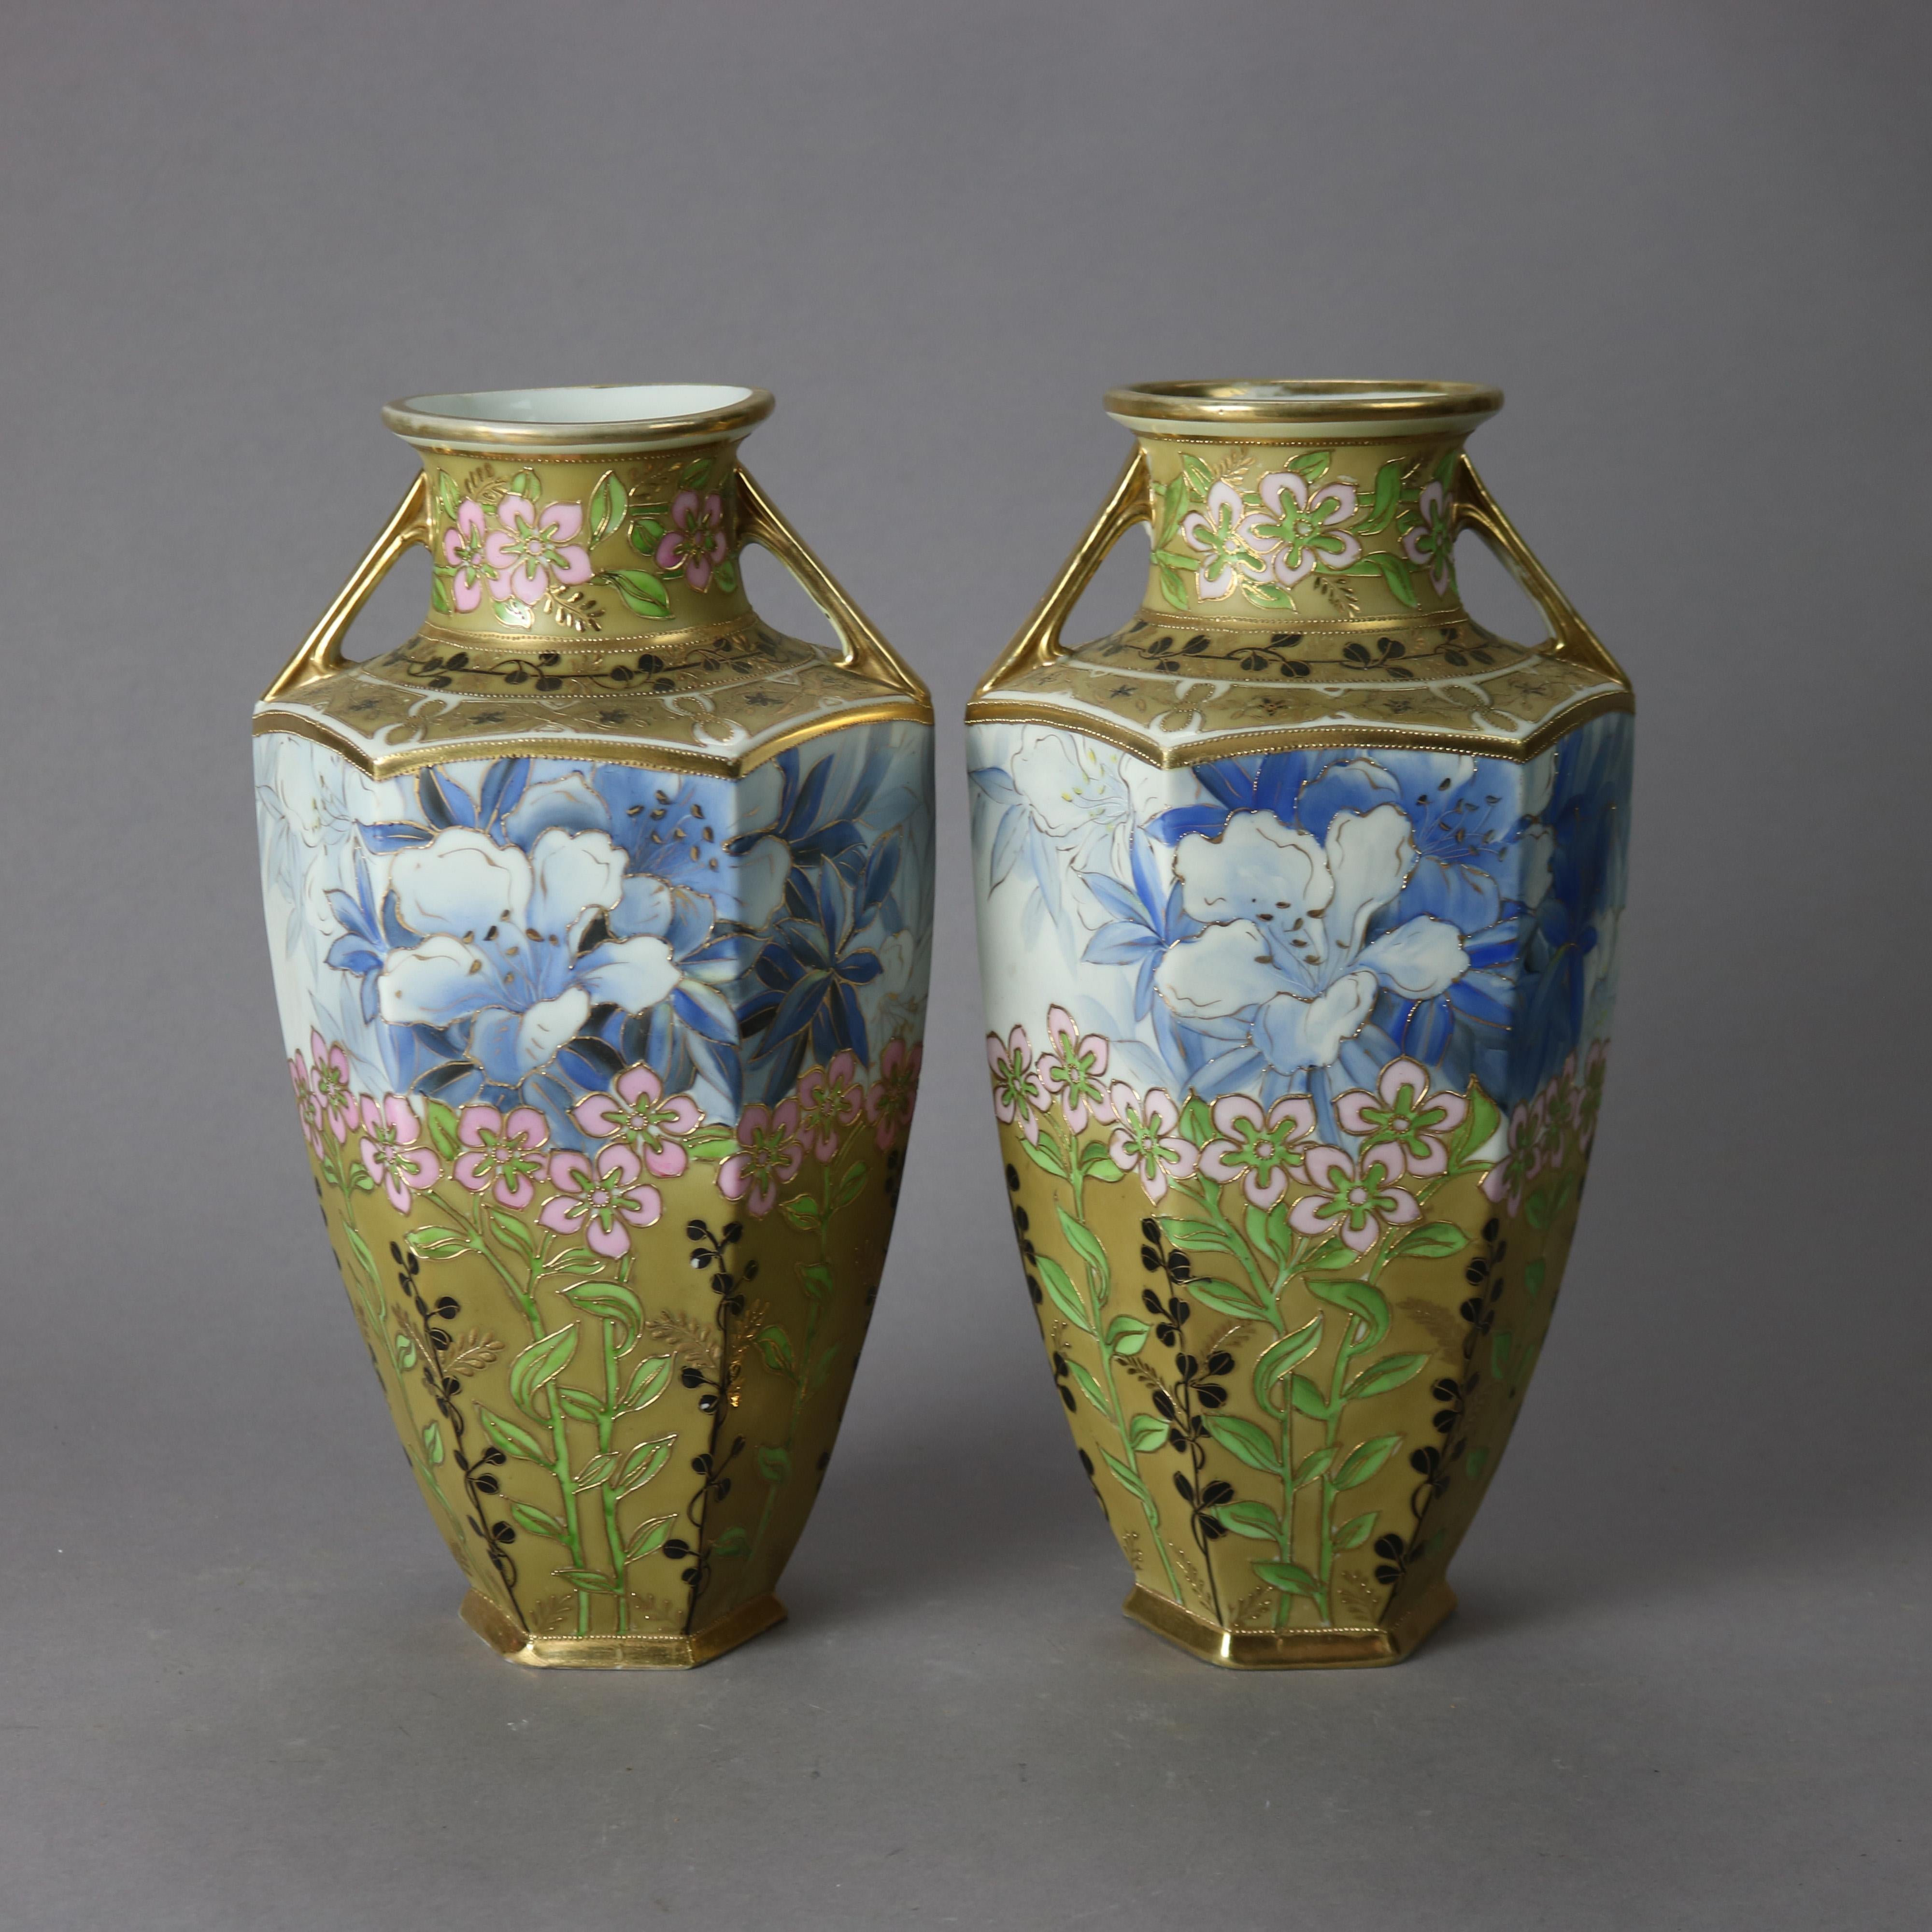 An antique pair of Japanese Nippon vases offer porcelain construction in hexagonal form with double handles, hand painted and enameled floral design, and gilt highlights throughout, maker mark on base as photographed, c1920

Measures - 12.75